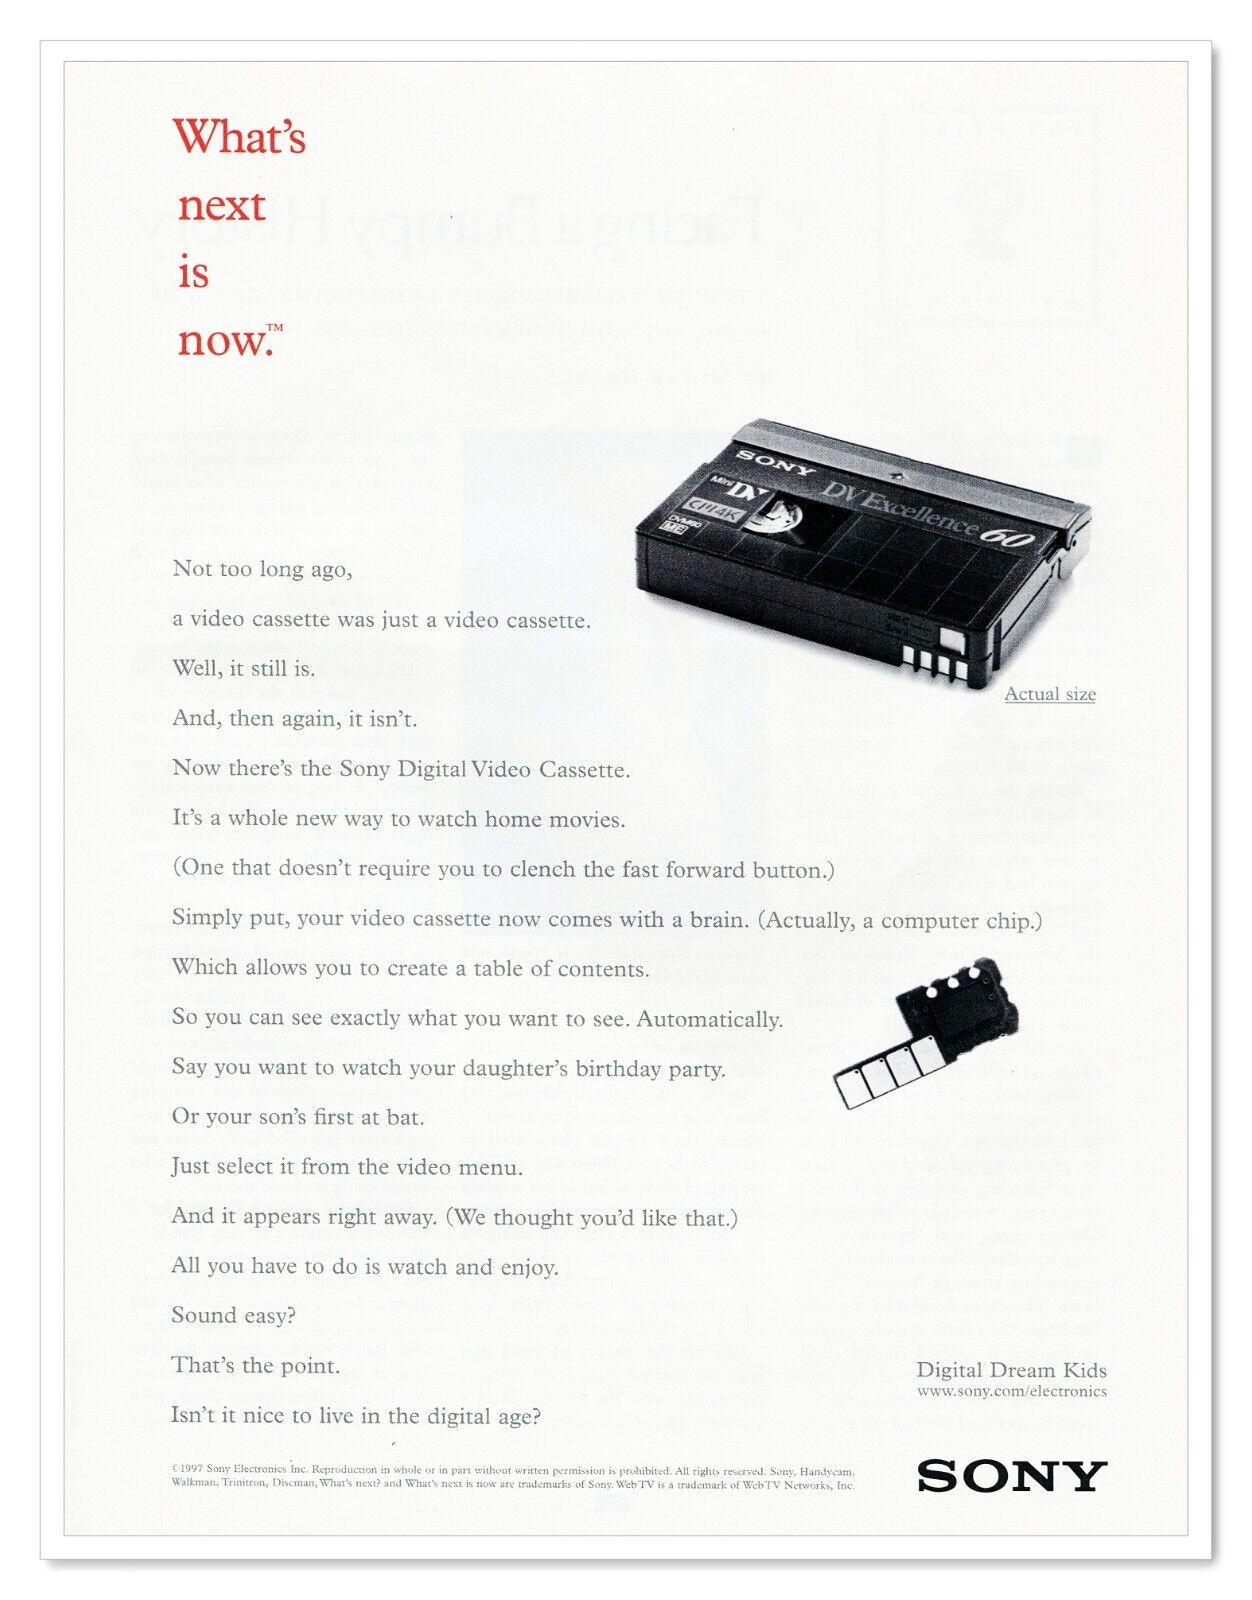 Sony Electronics Digital Video Cassette Vintage 1997 Full-Page Print Magazine Ad